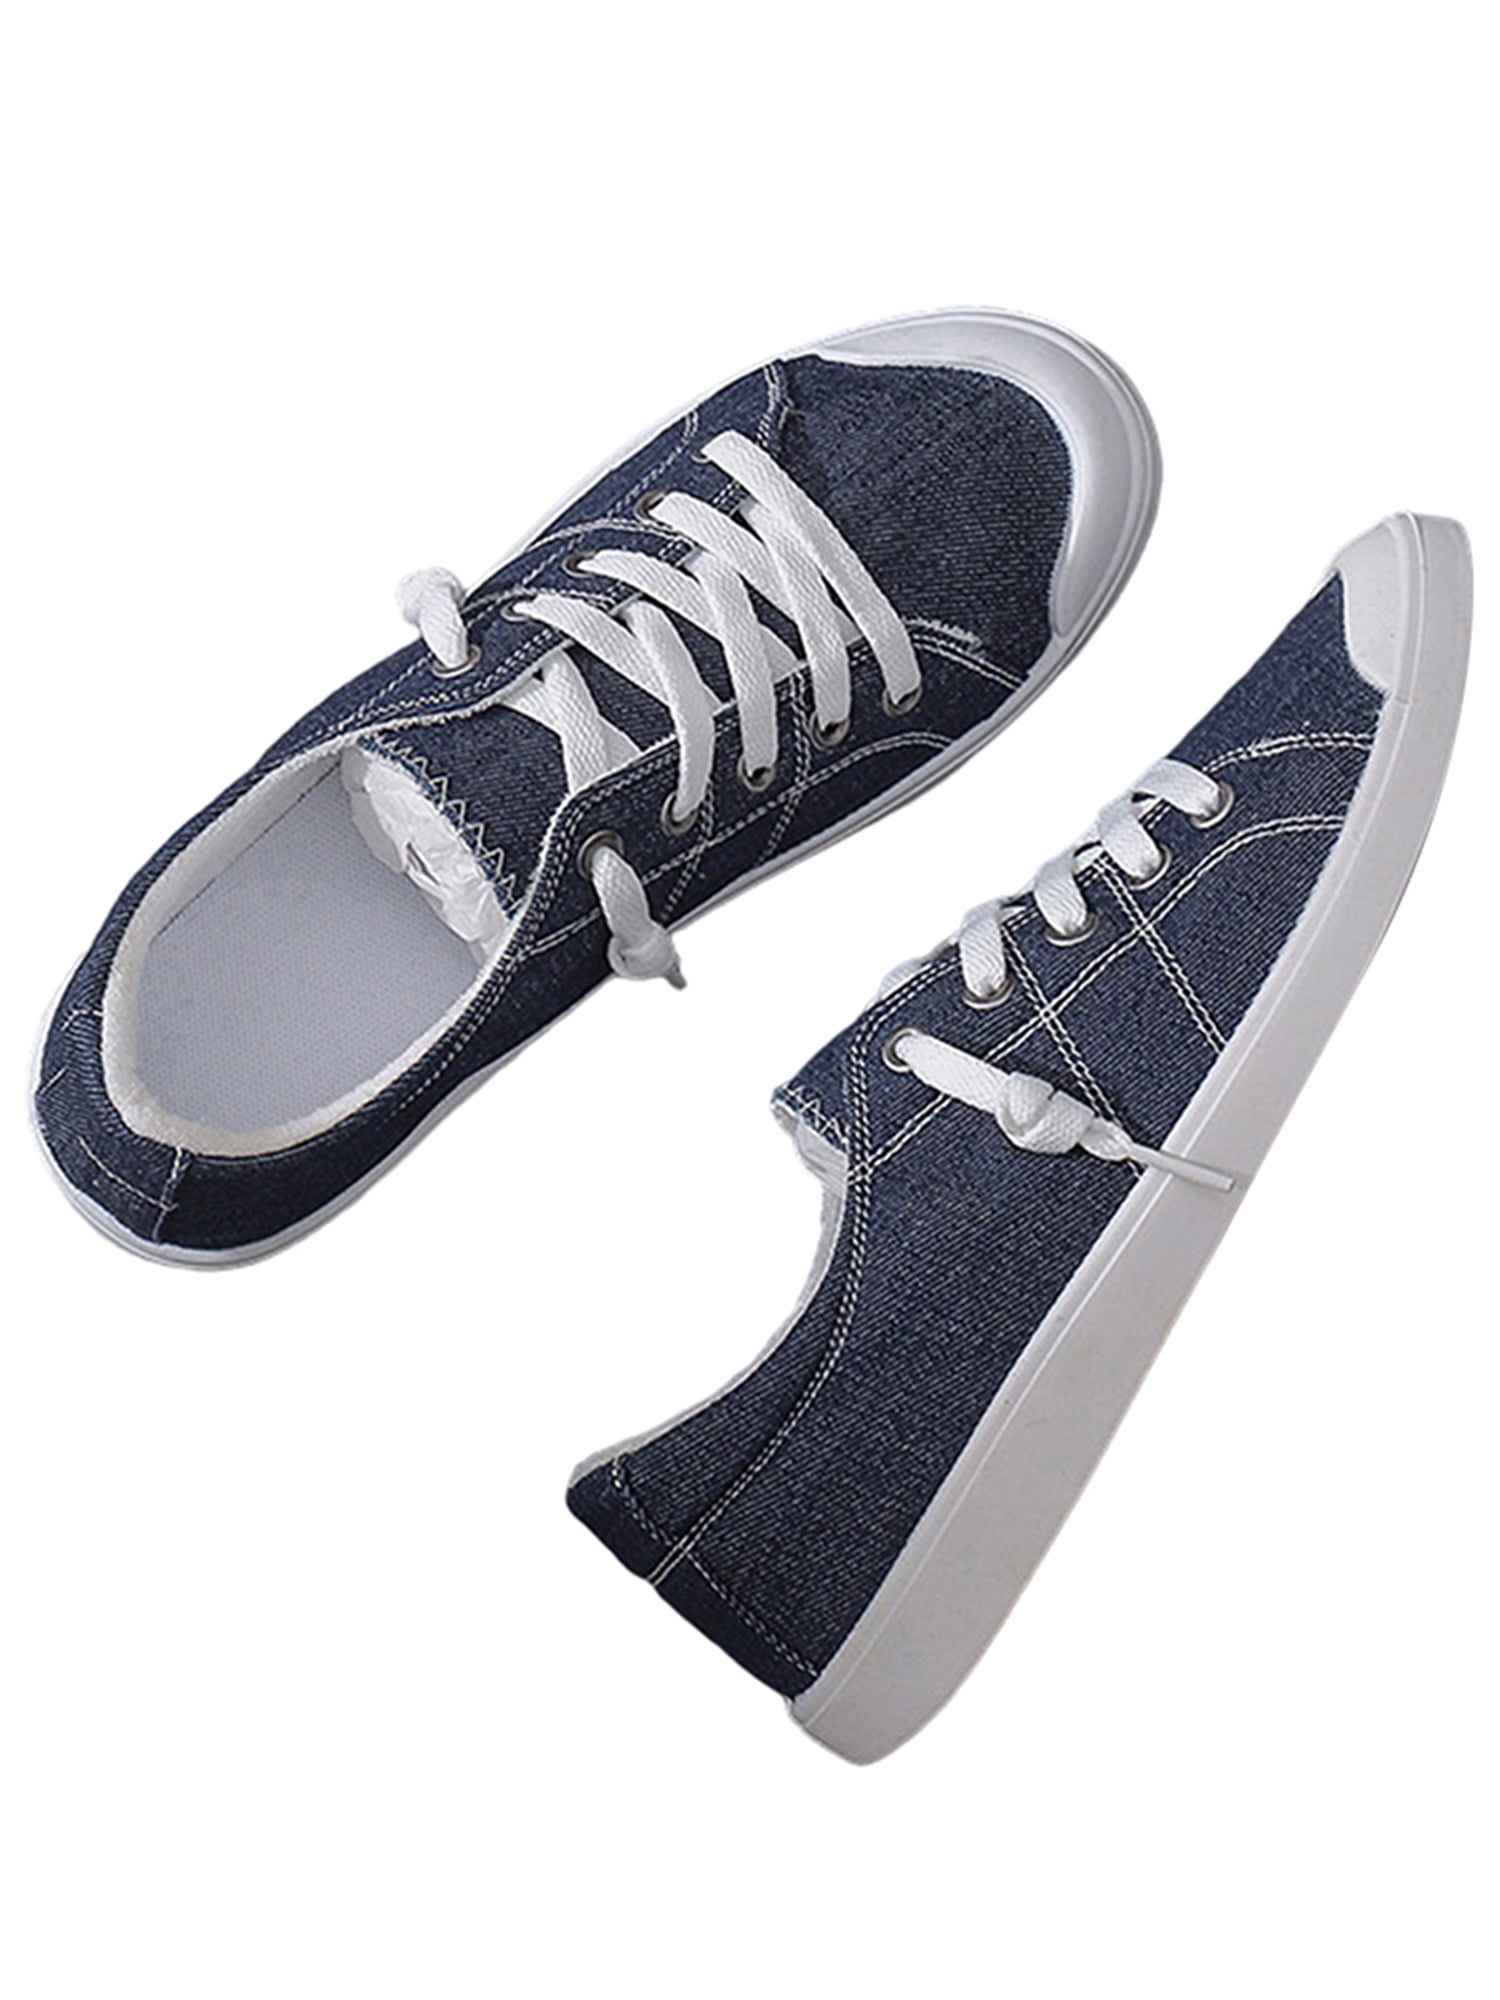 Womens Canvas Low Top Sneaker Lace-up Fashion Casual Shoes 